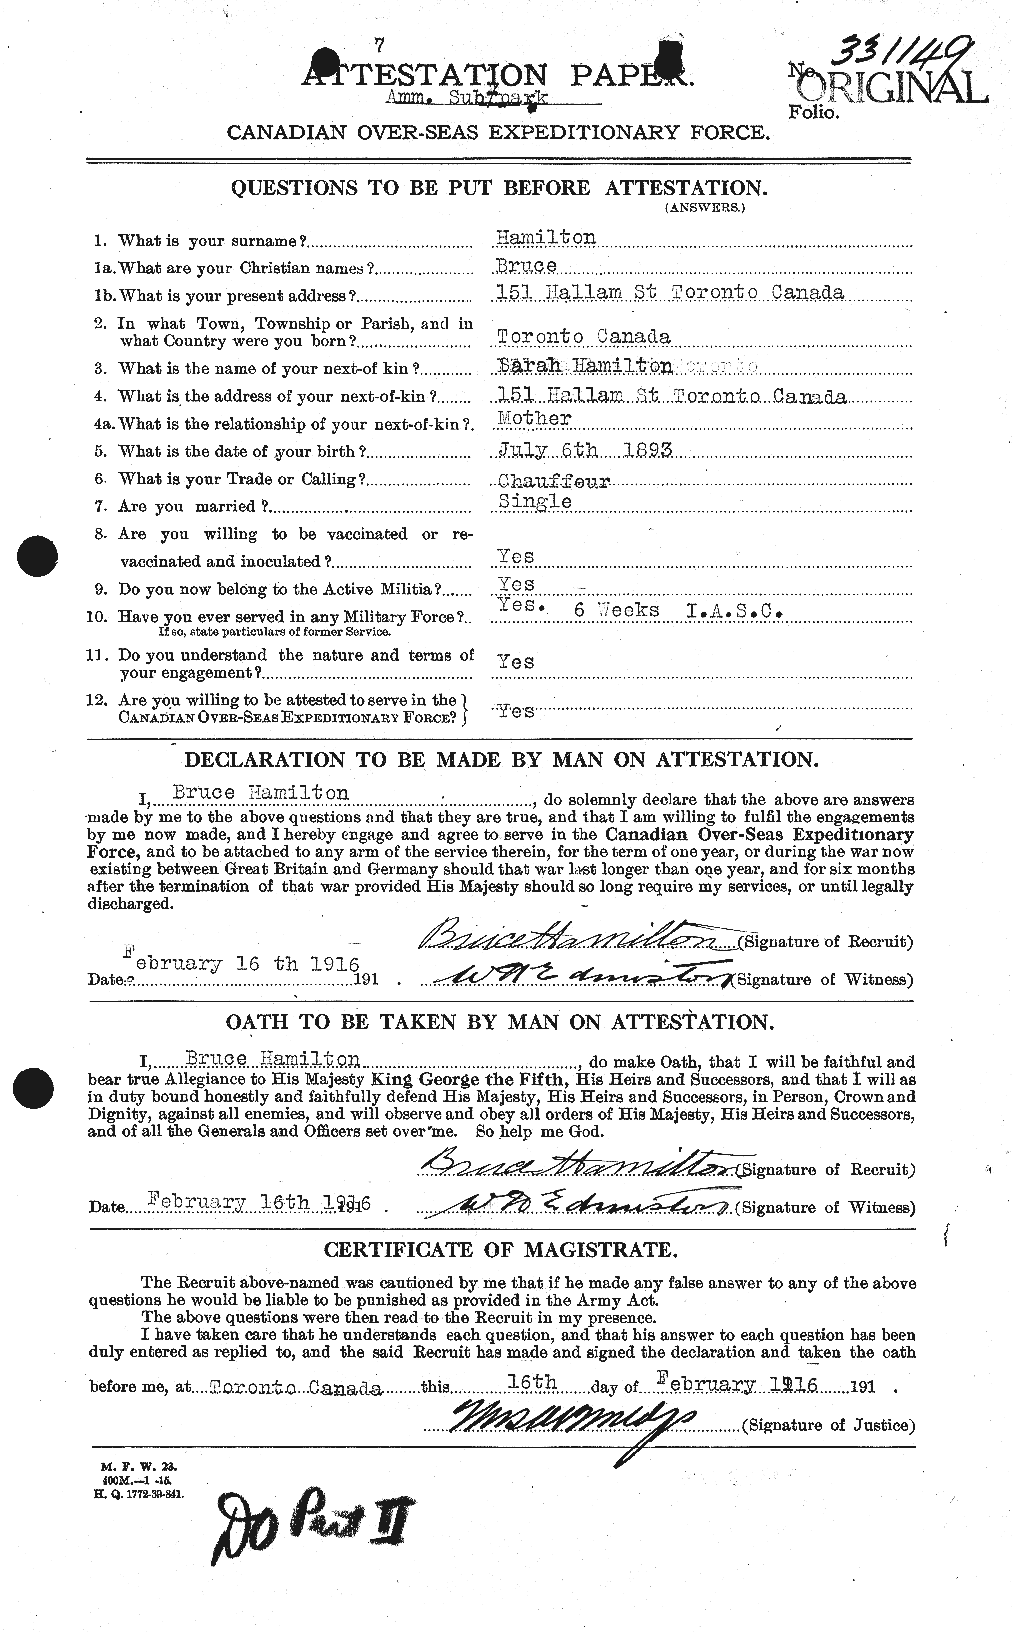 Personnel Records of the First World War - CEF 375277a